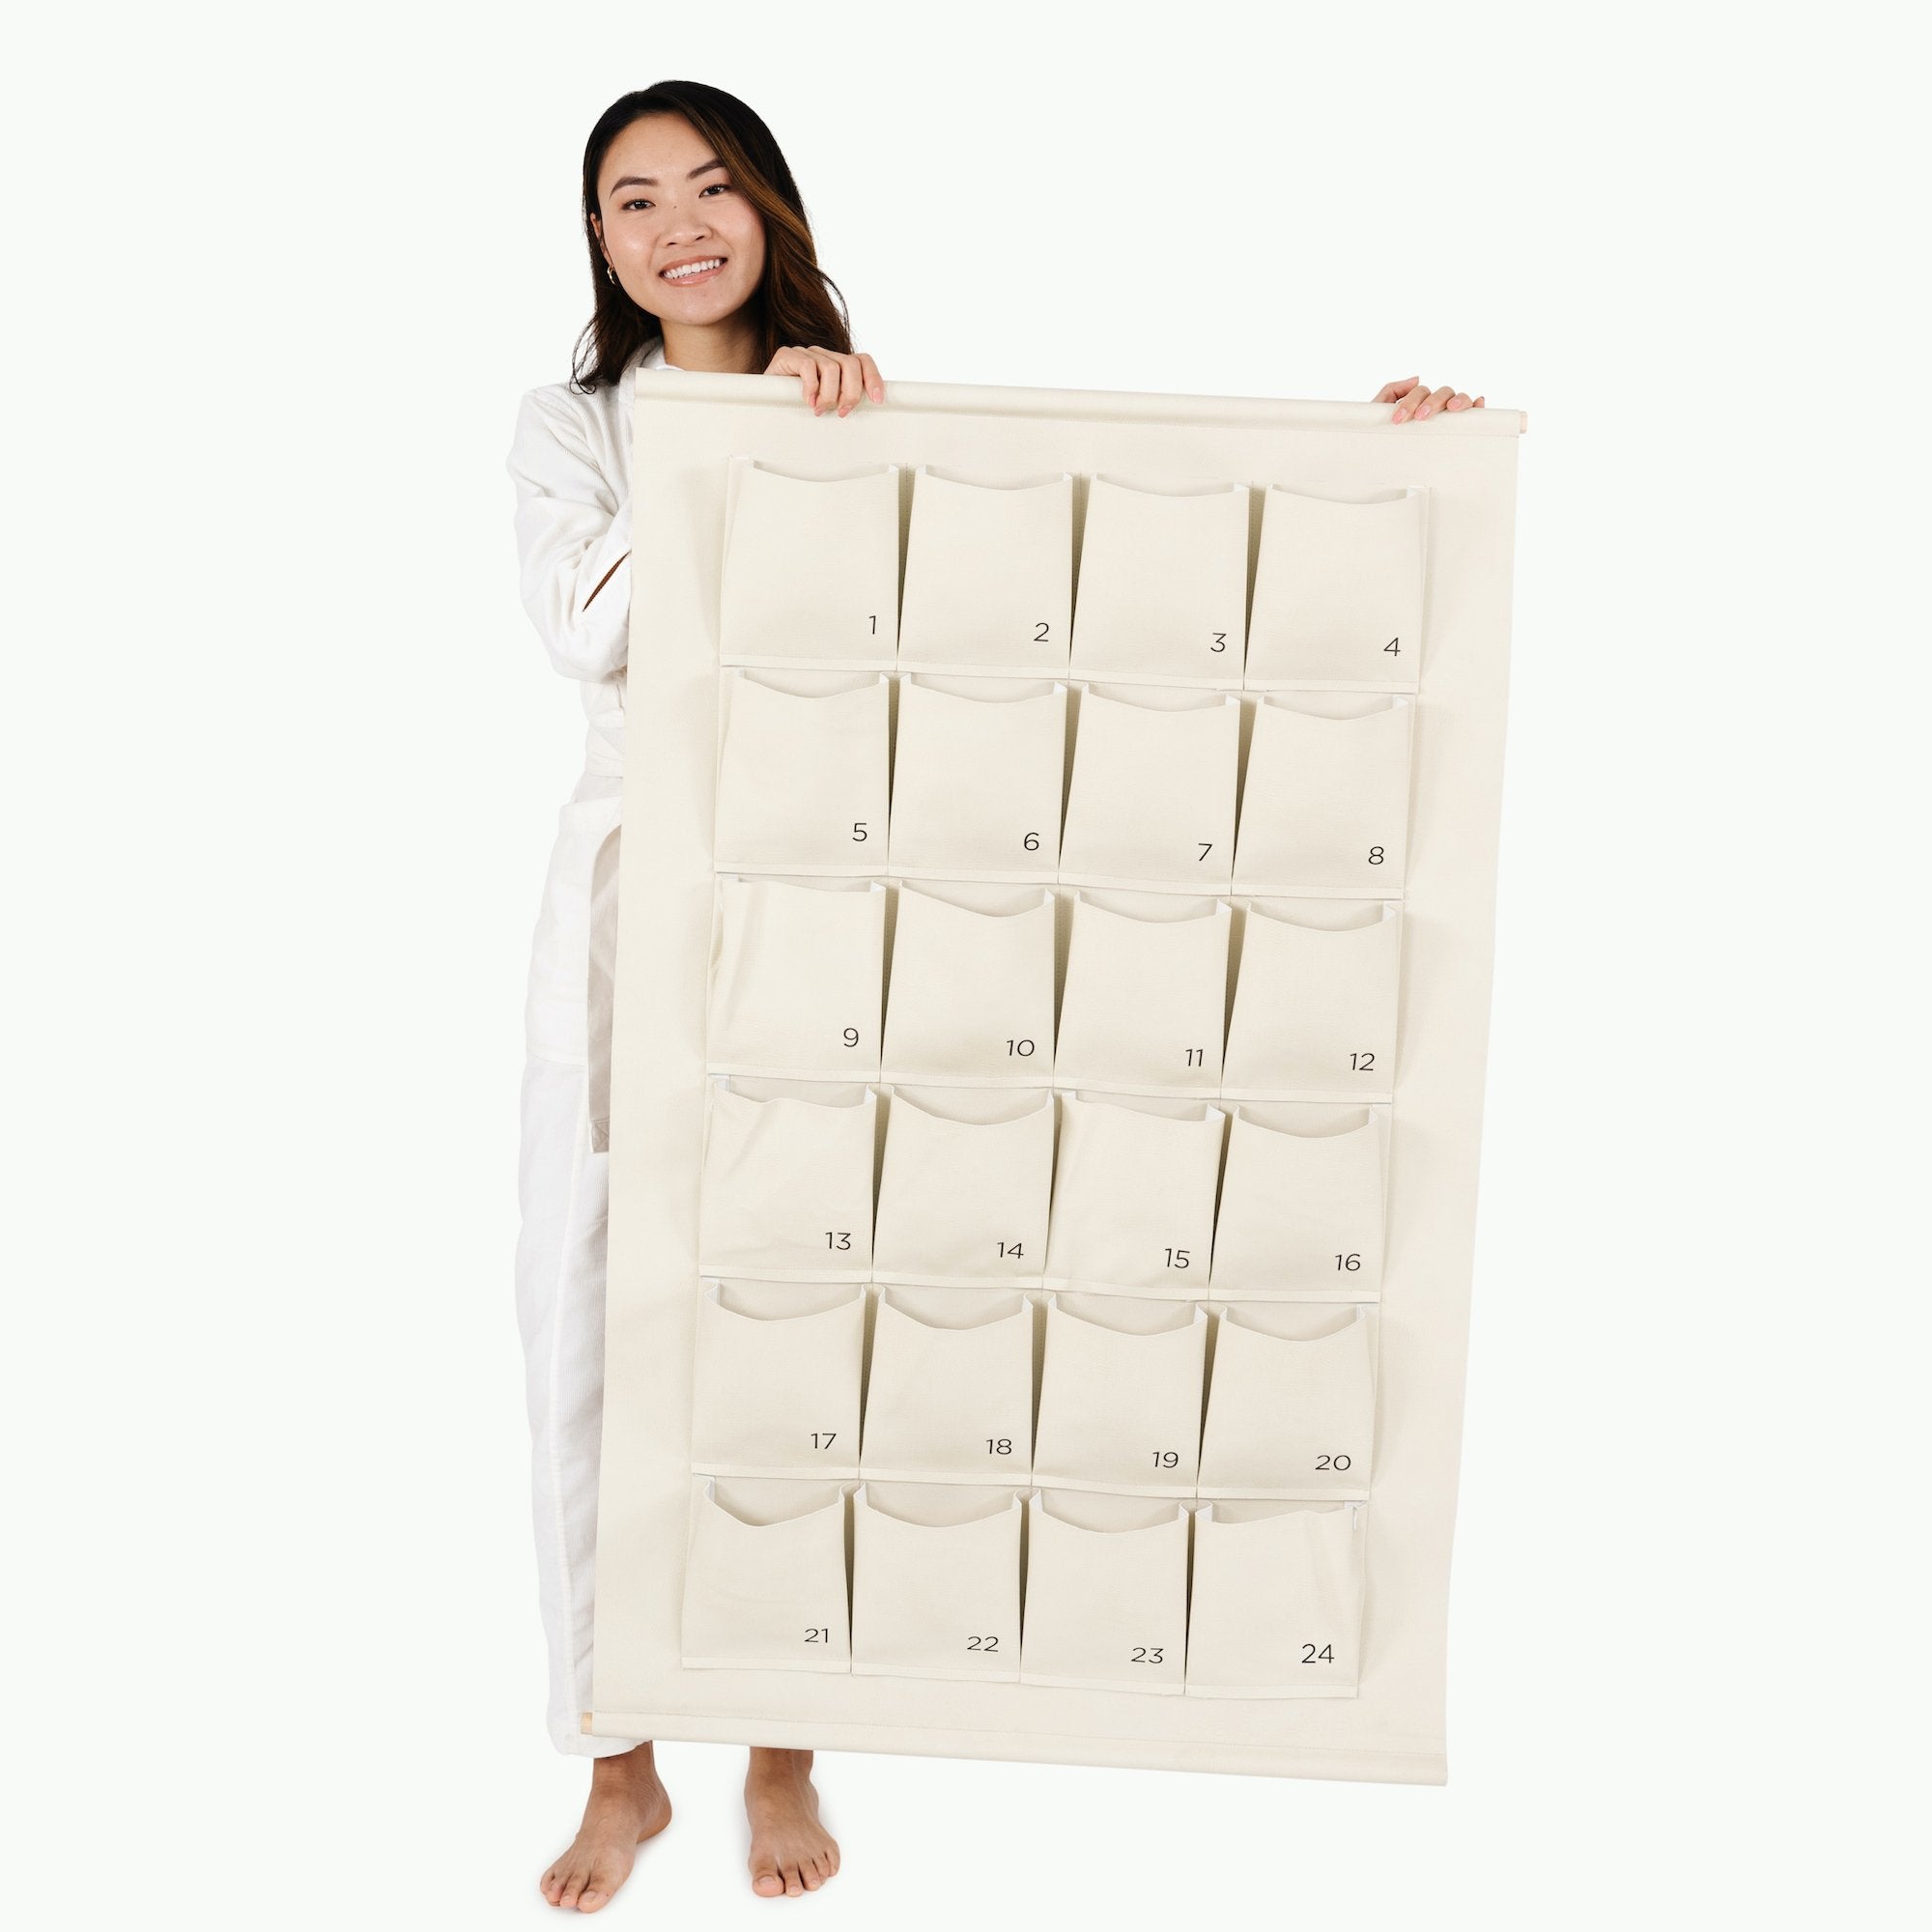 Ivory (on sale)@Woman holding the Large Ivory Advent Calendar